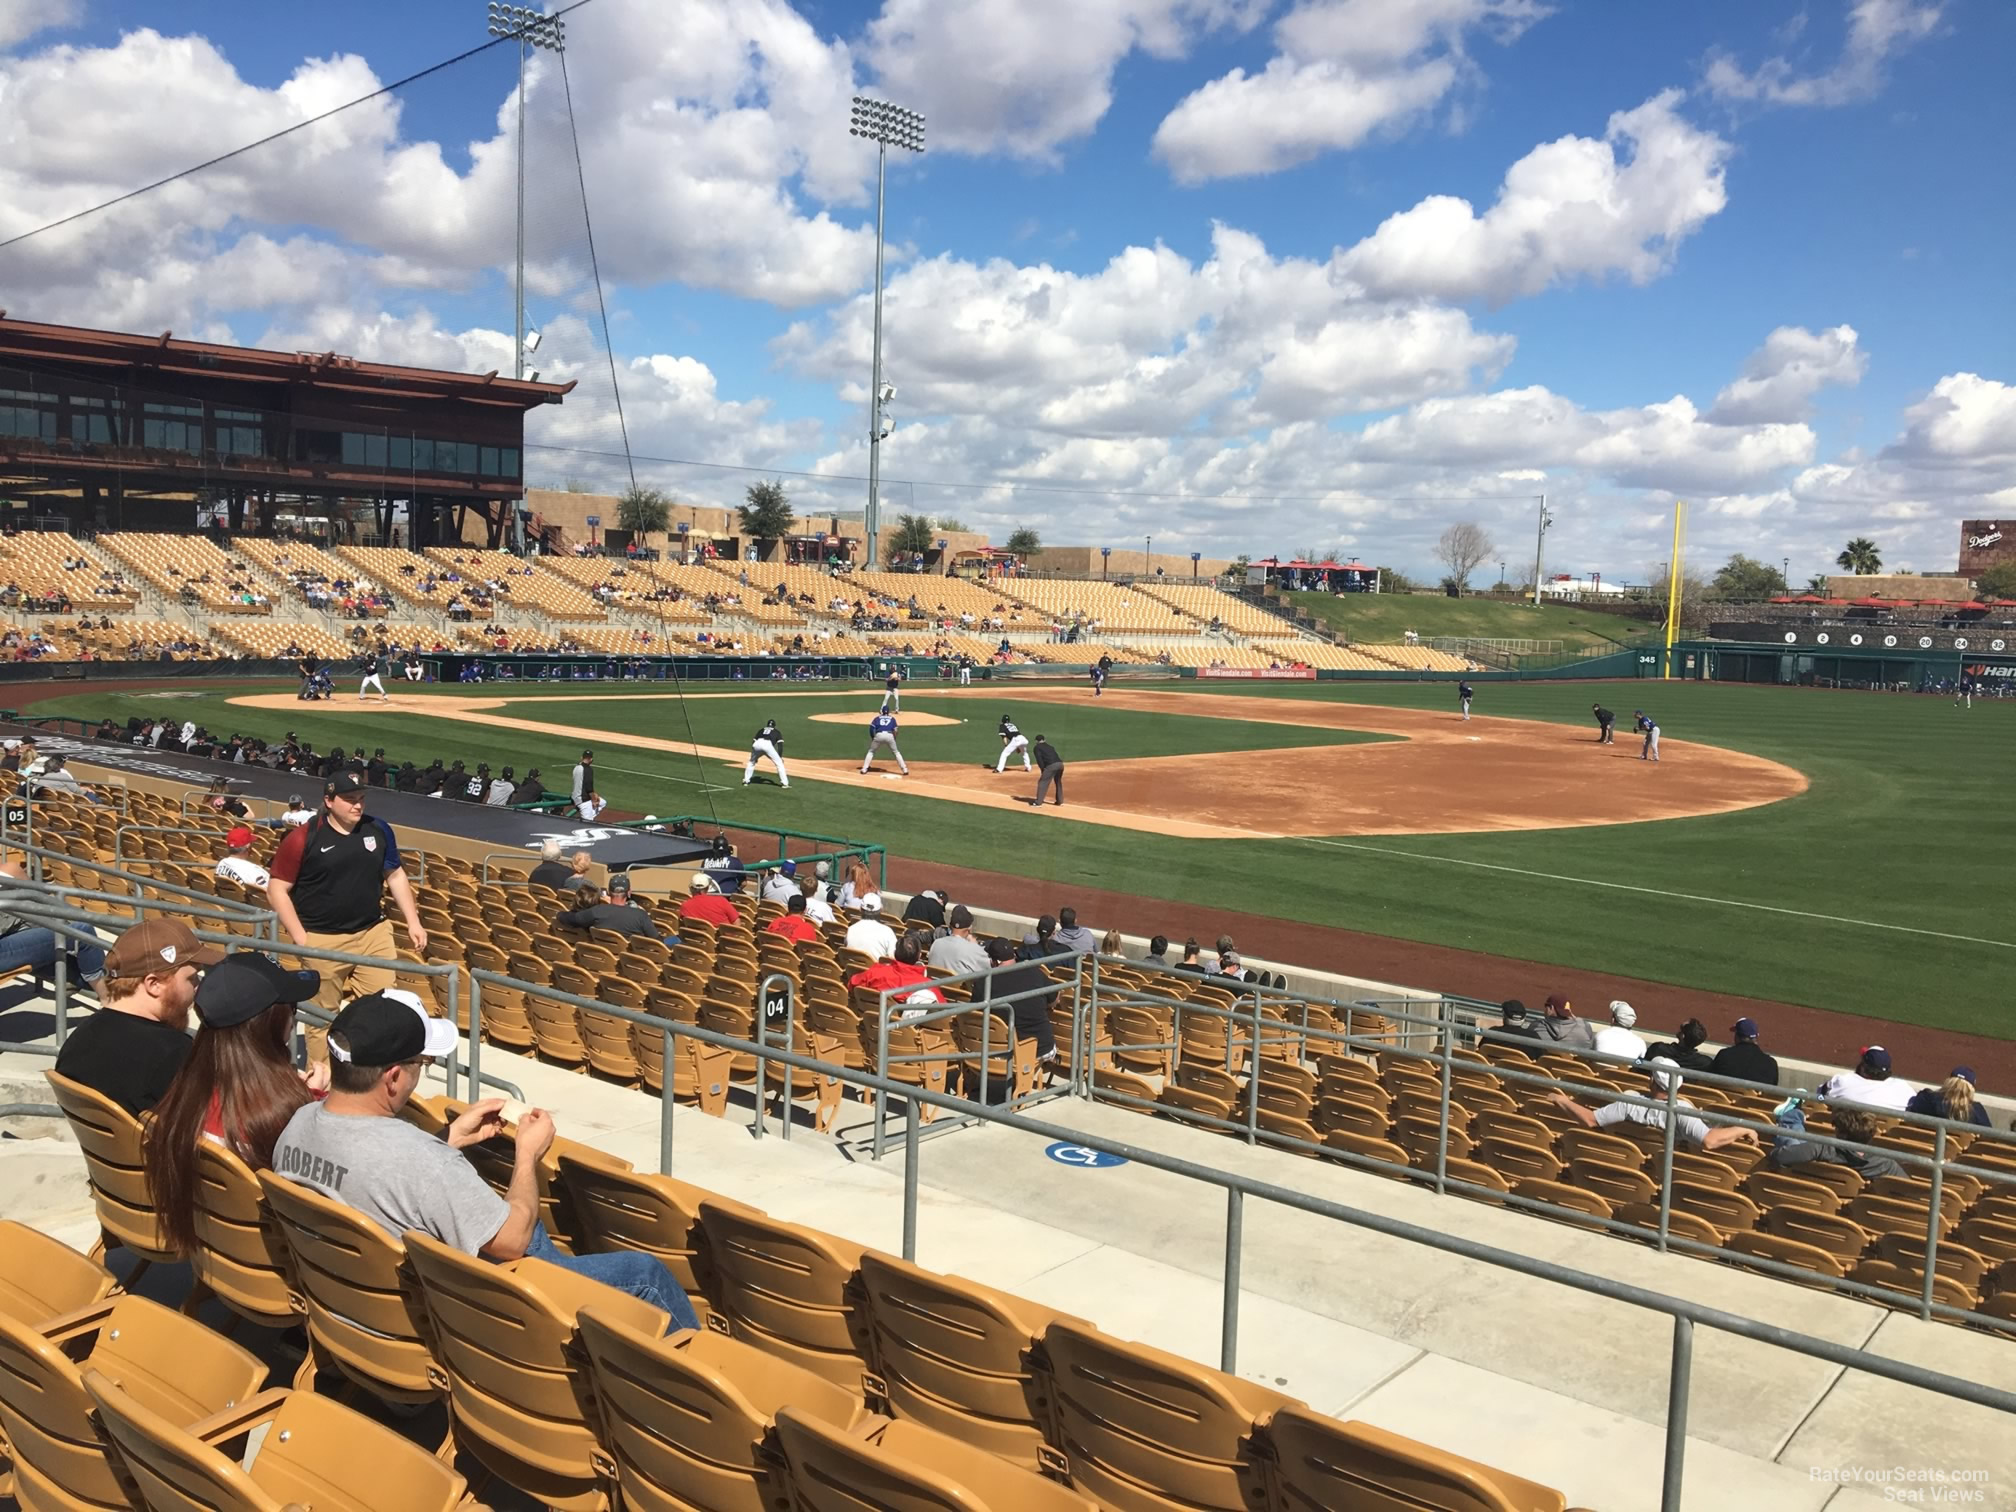 section 104, row 5 seat view  - camelback ranch